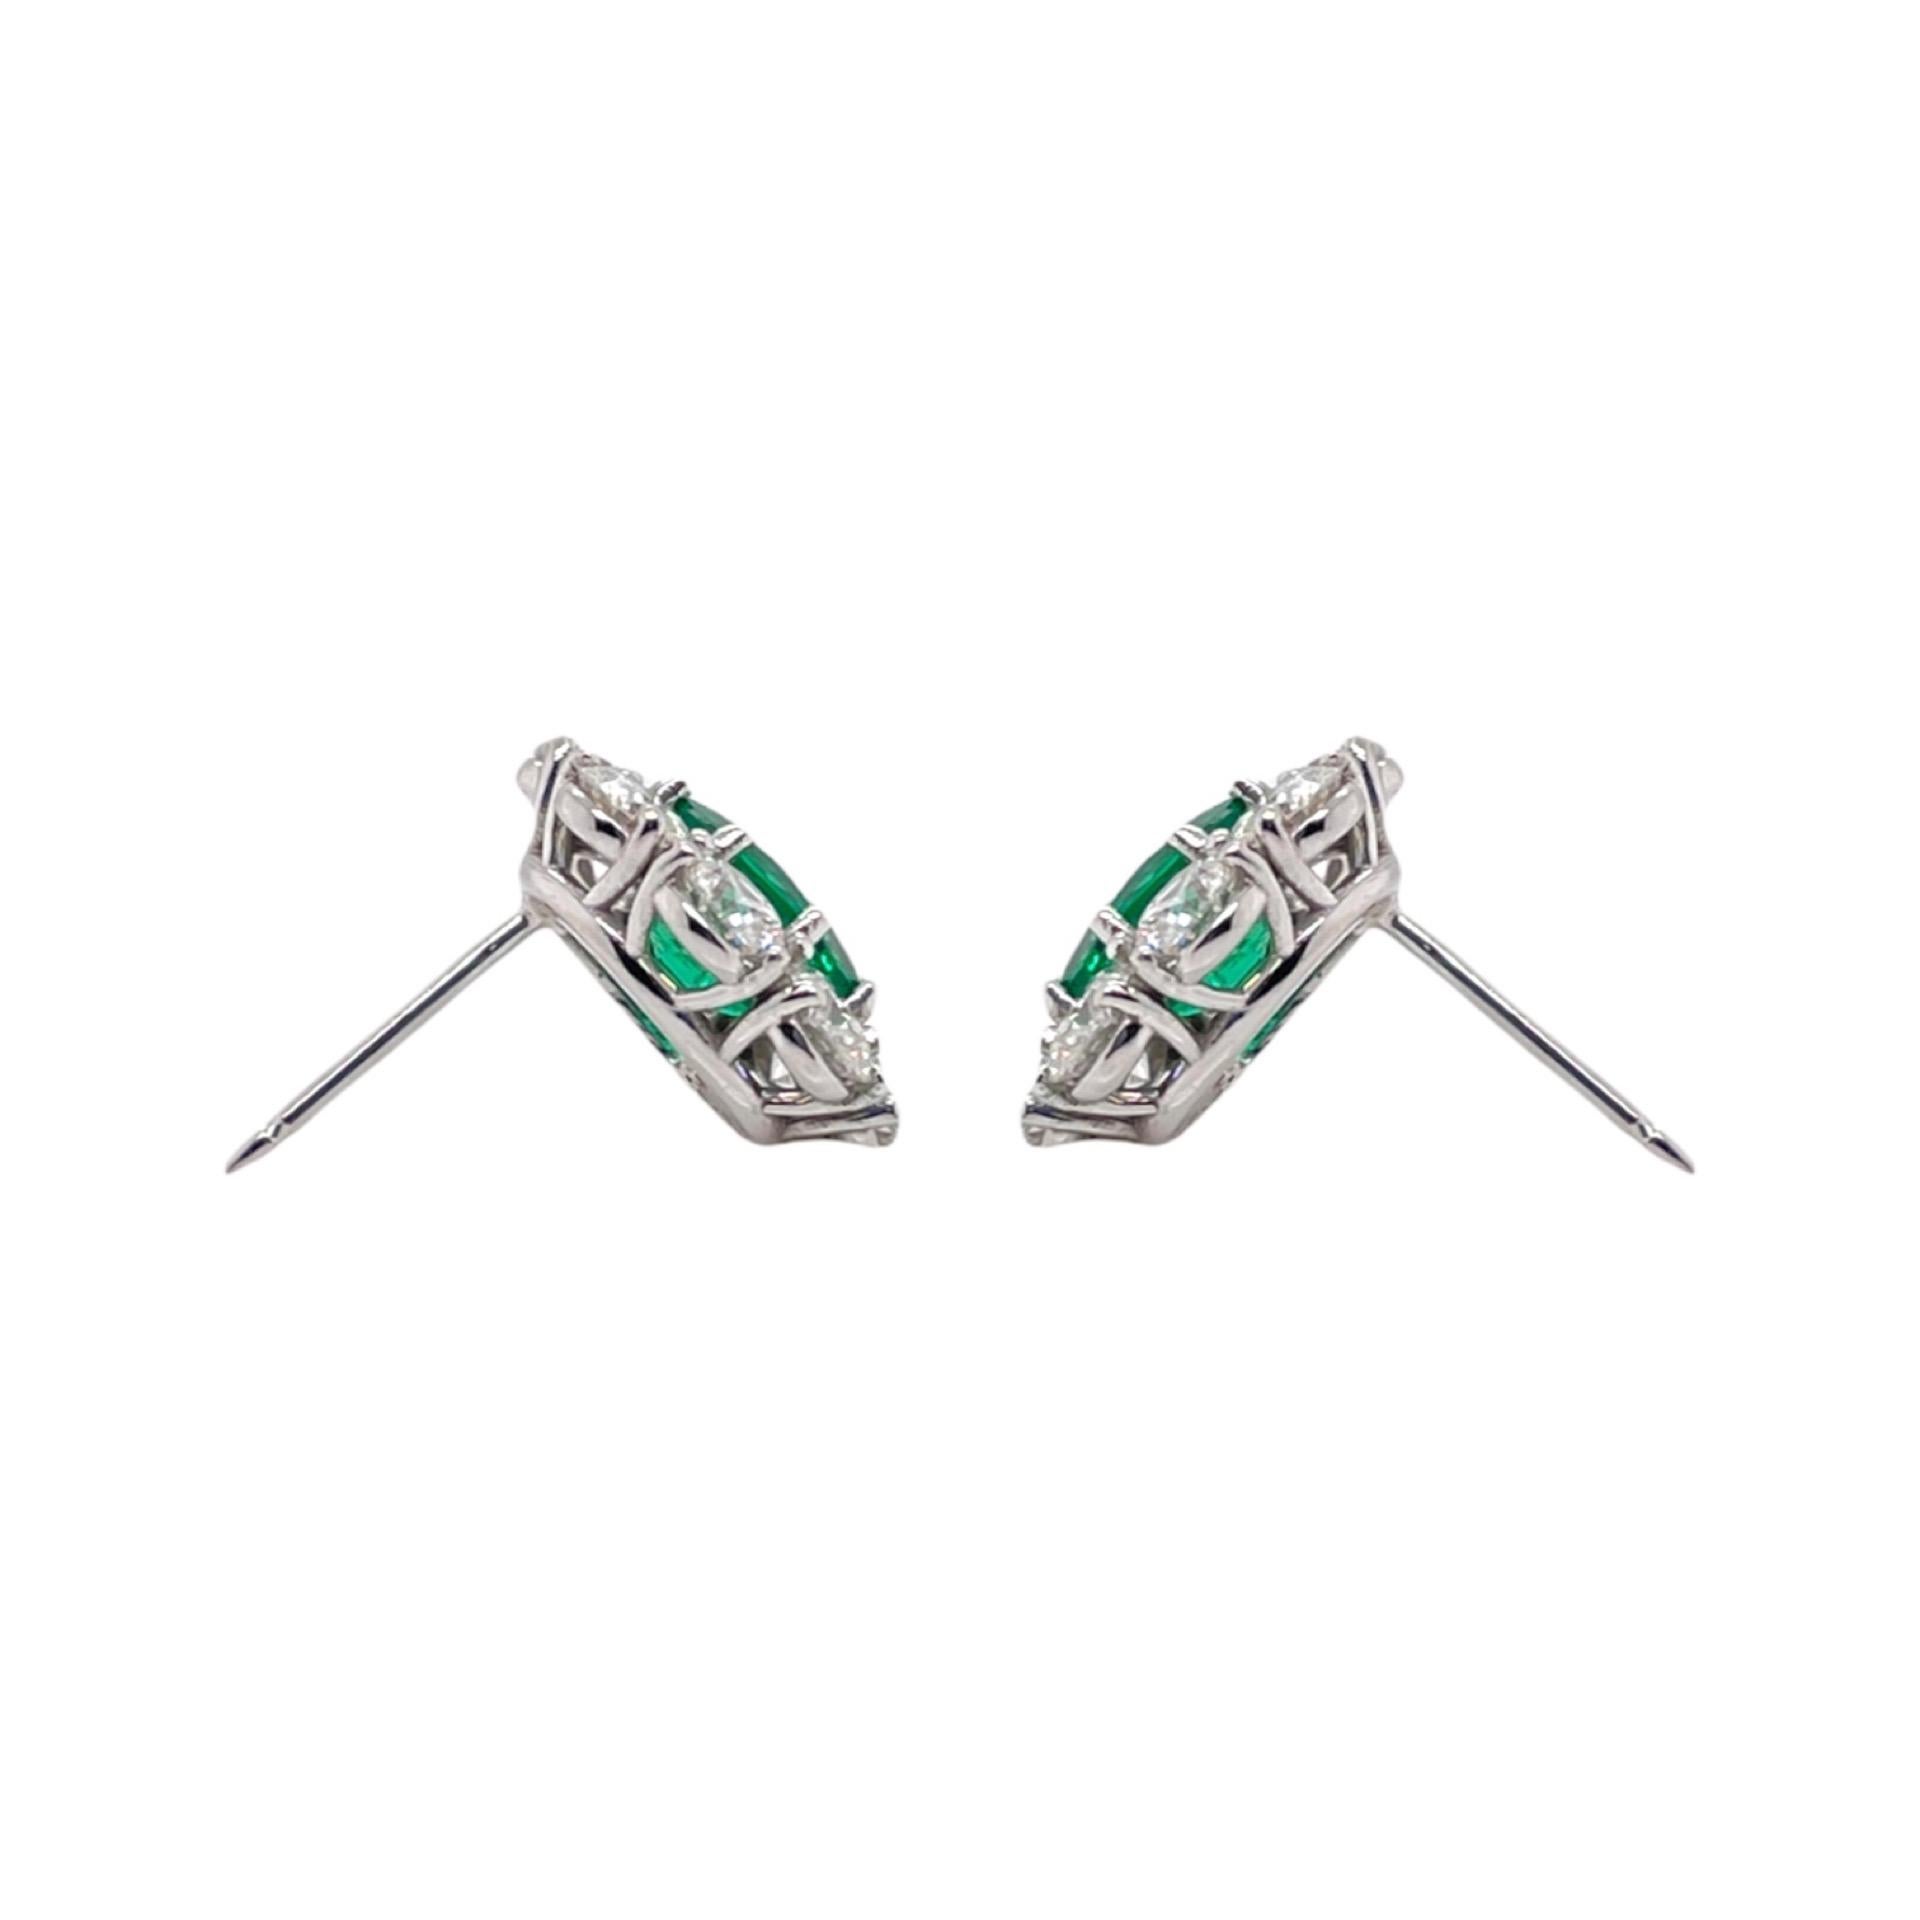 Earrings contain 2 fine oval emeralds, 2.38tcw and 16 round brilliant diamonds surrounding center stones, 3.12tcw. Diamonds are colorless and VS in clarity, excellent cut. All stones are mounted in a handmade 18k prong setting. Earrings have a push